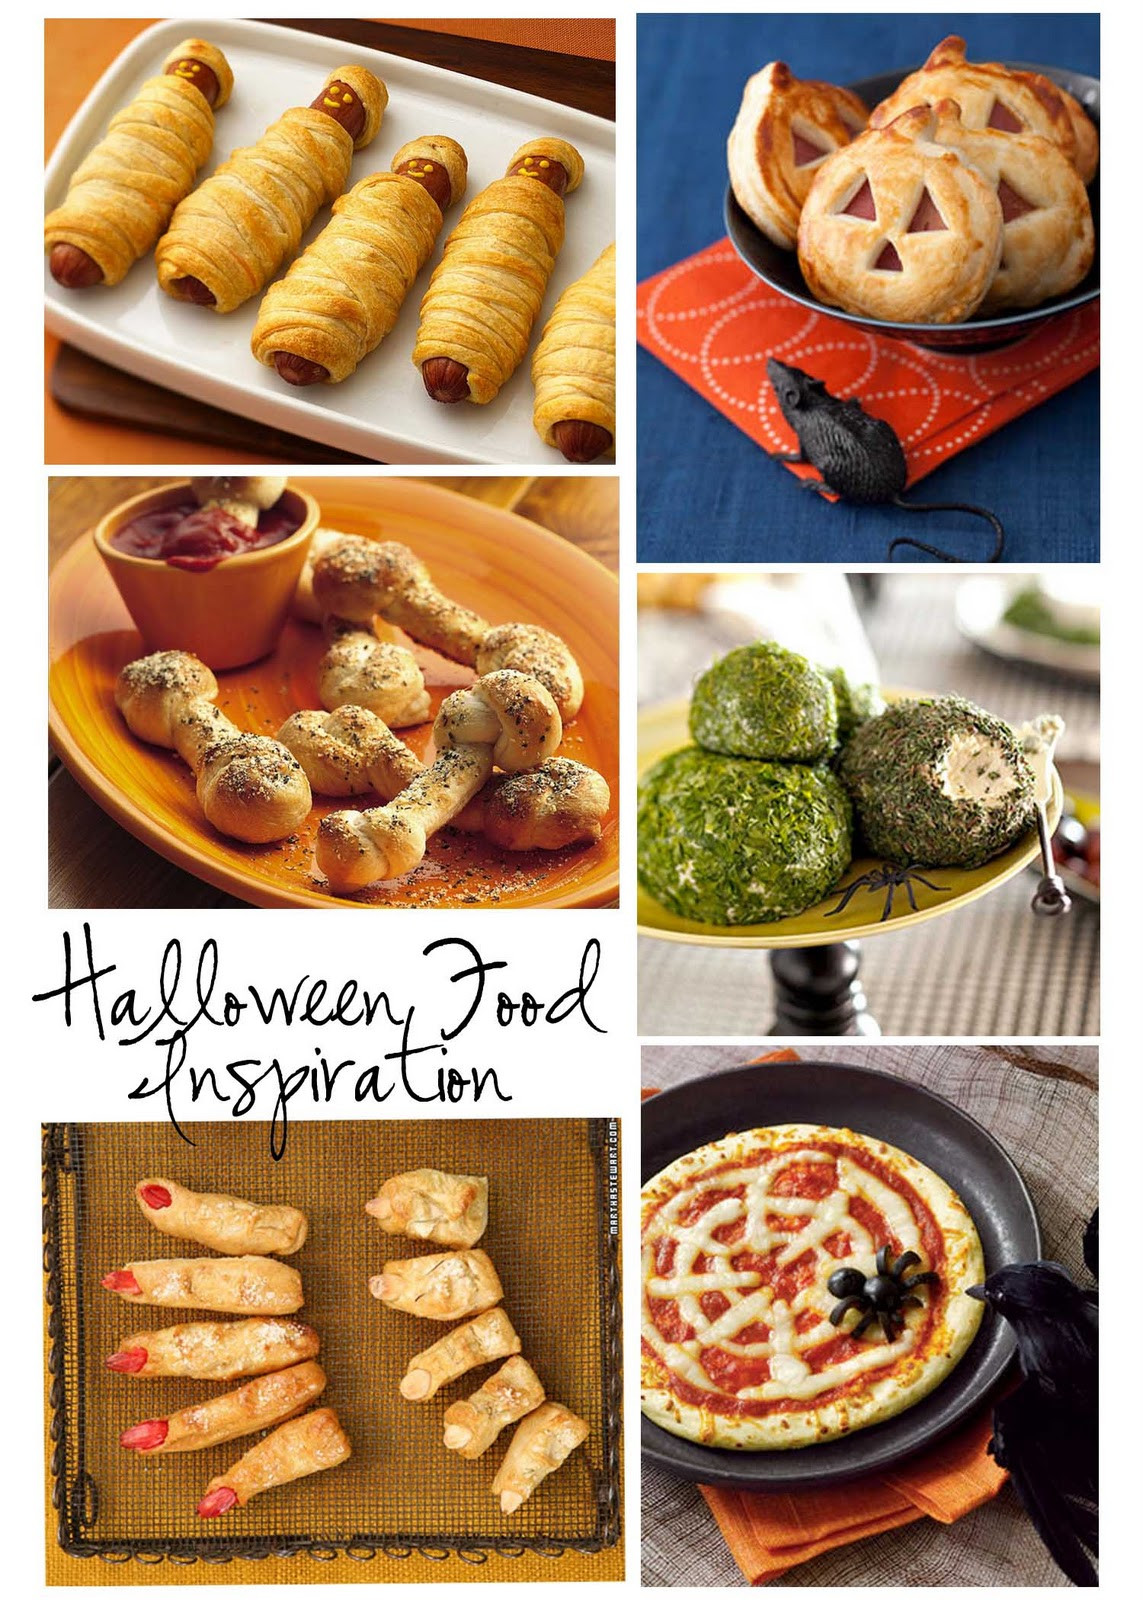 Dinner Ideas For Halloween Party
 Room to Inspire Spooky Food Ideas